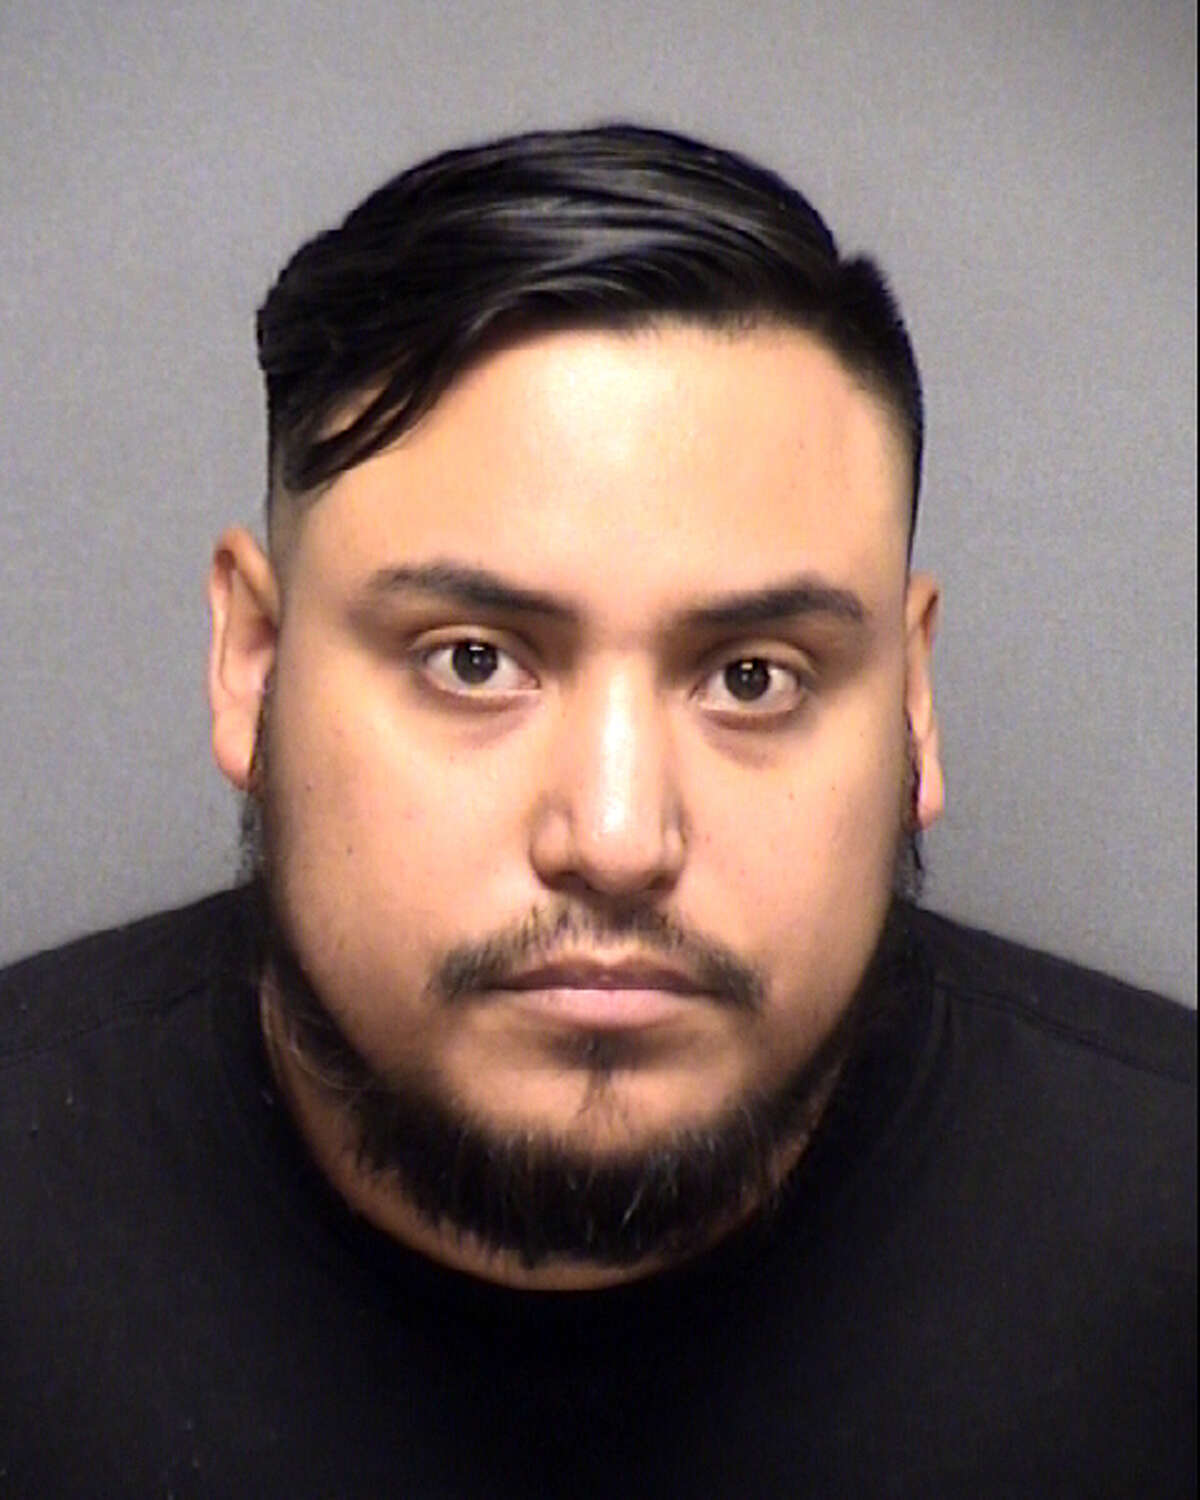 Kevin Adam Garcia was arrested on suspicion of sexual assault of a child on April 2, 2019.